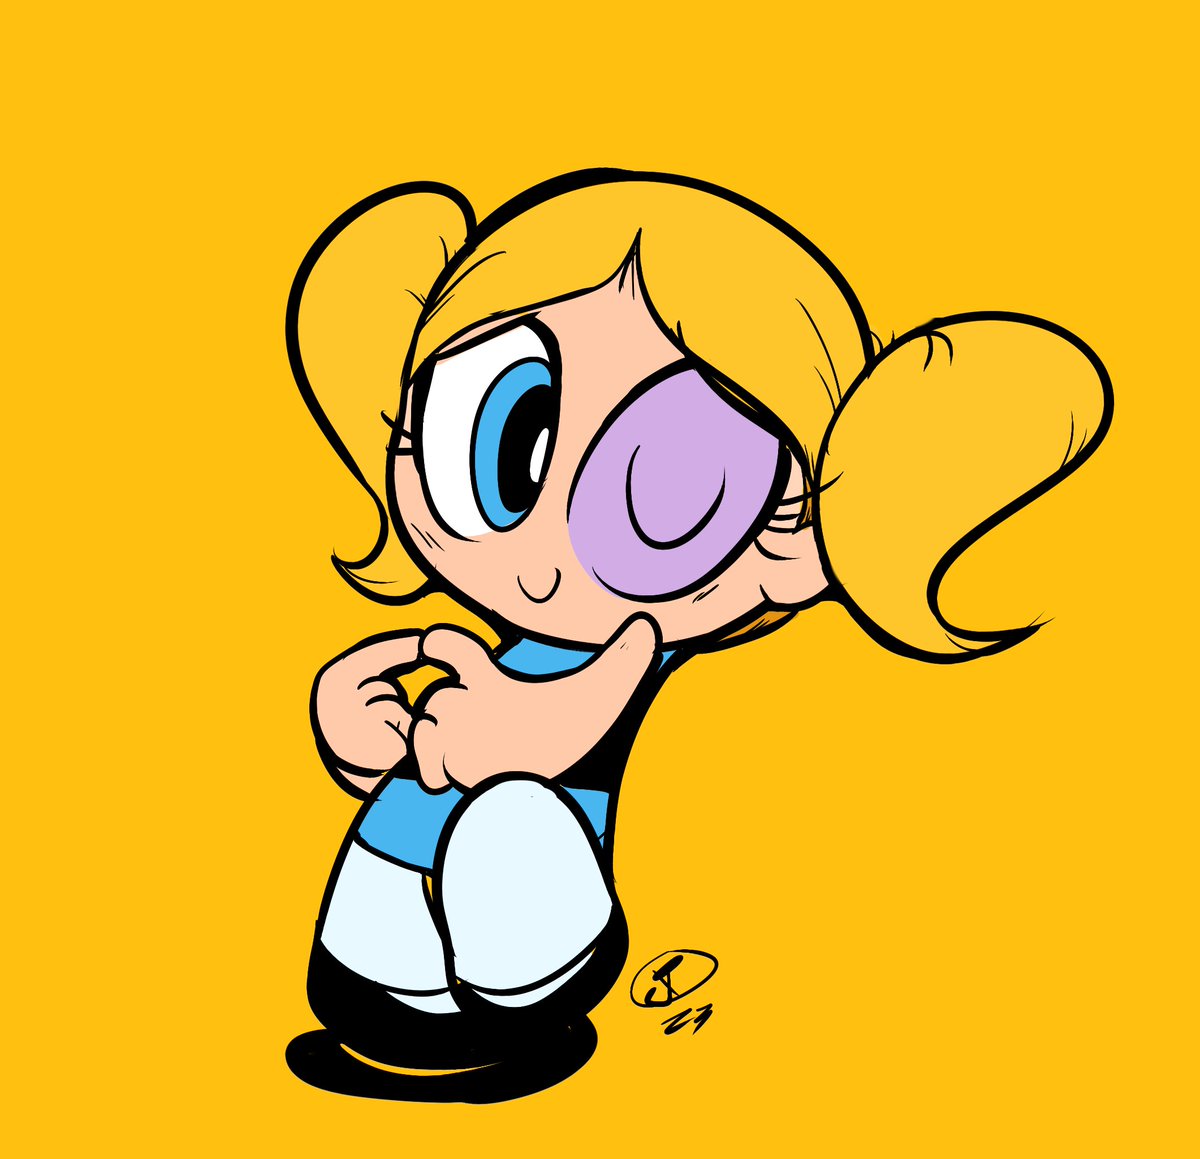 「Lifehack to drawing the PowerPuff Girls1」|DumbNBass (Comms OPEN)のイラスト